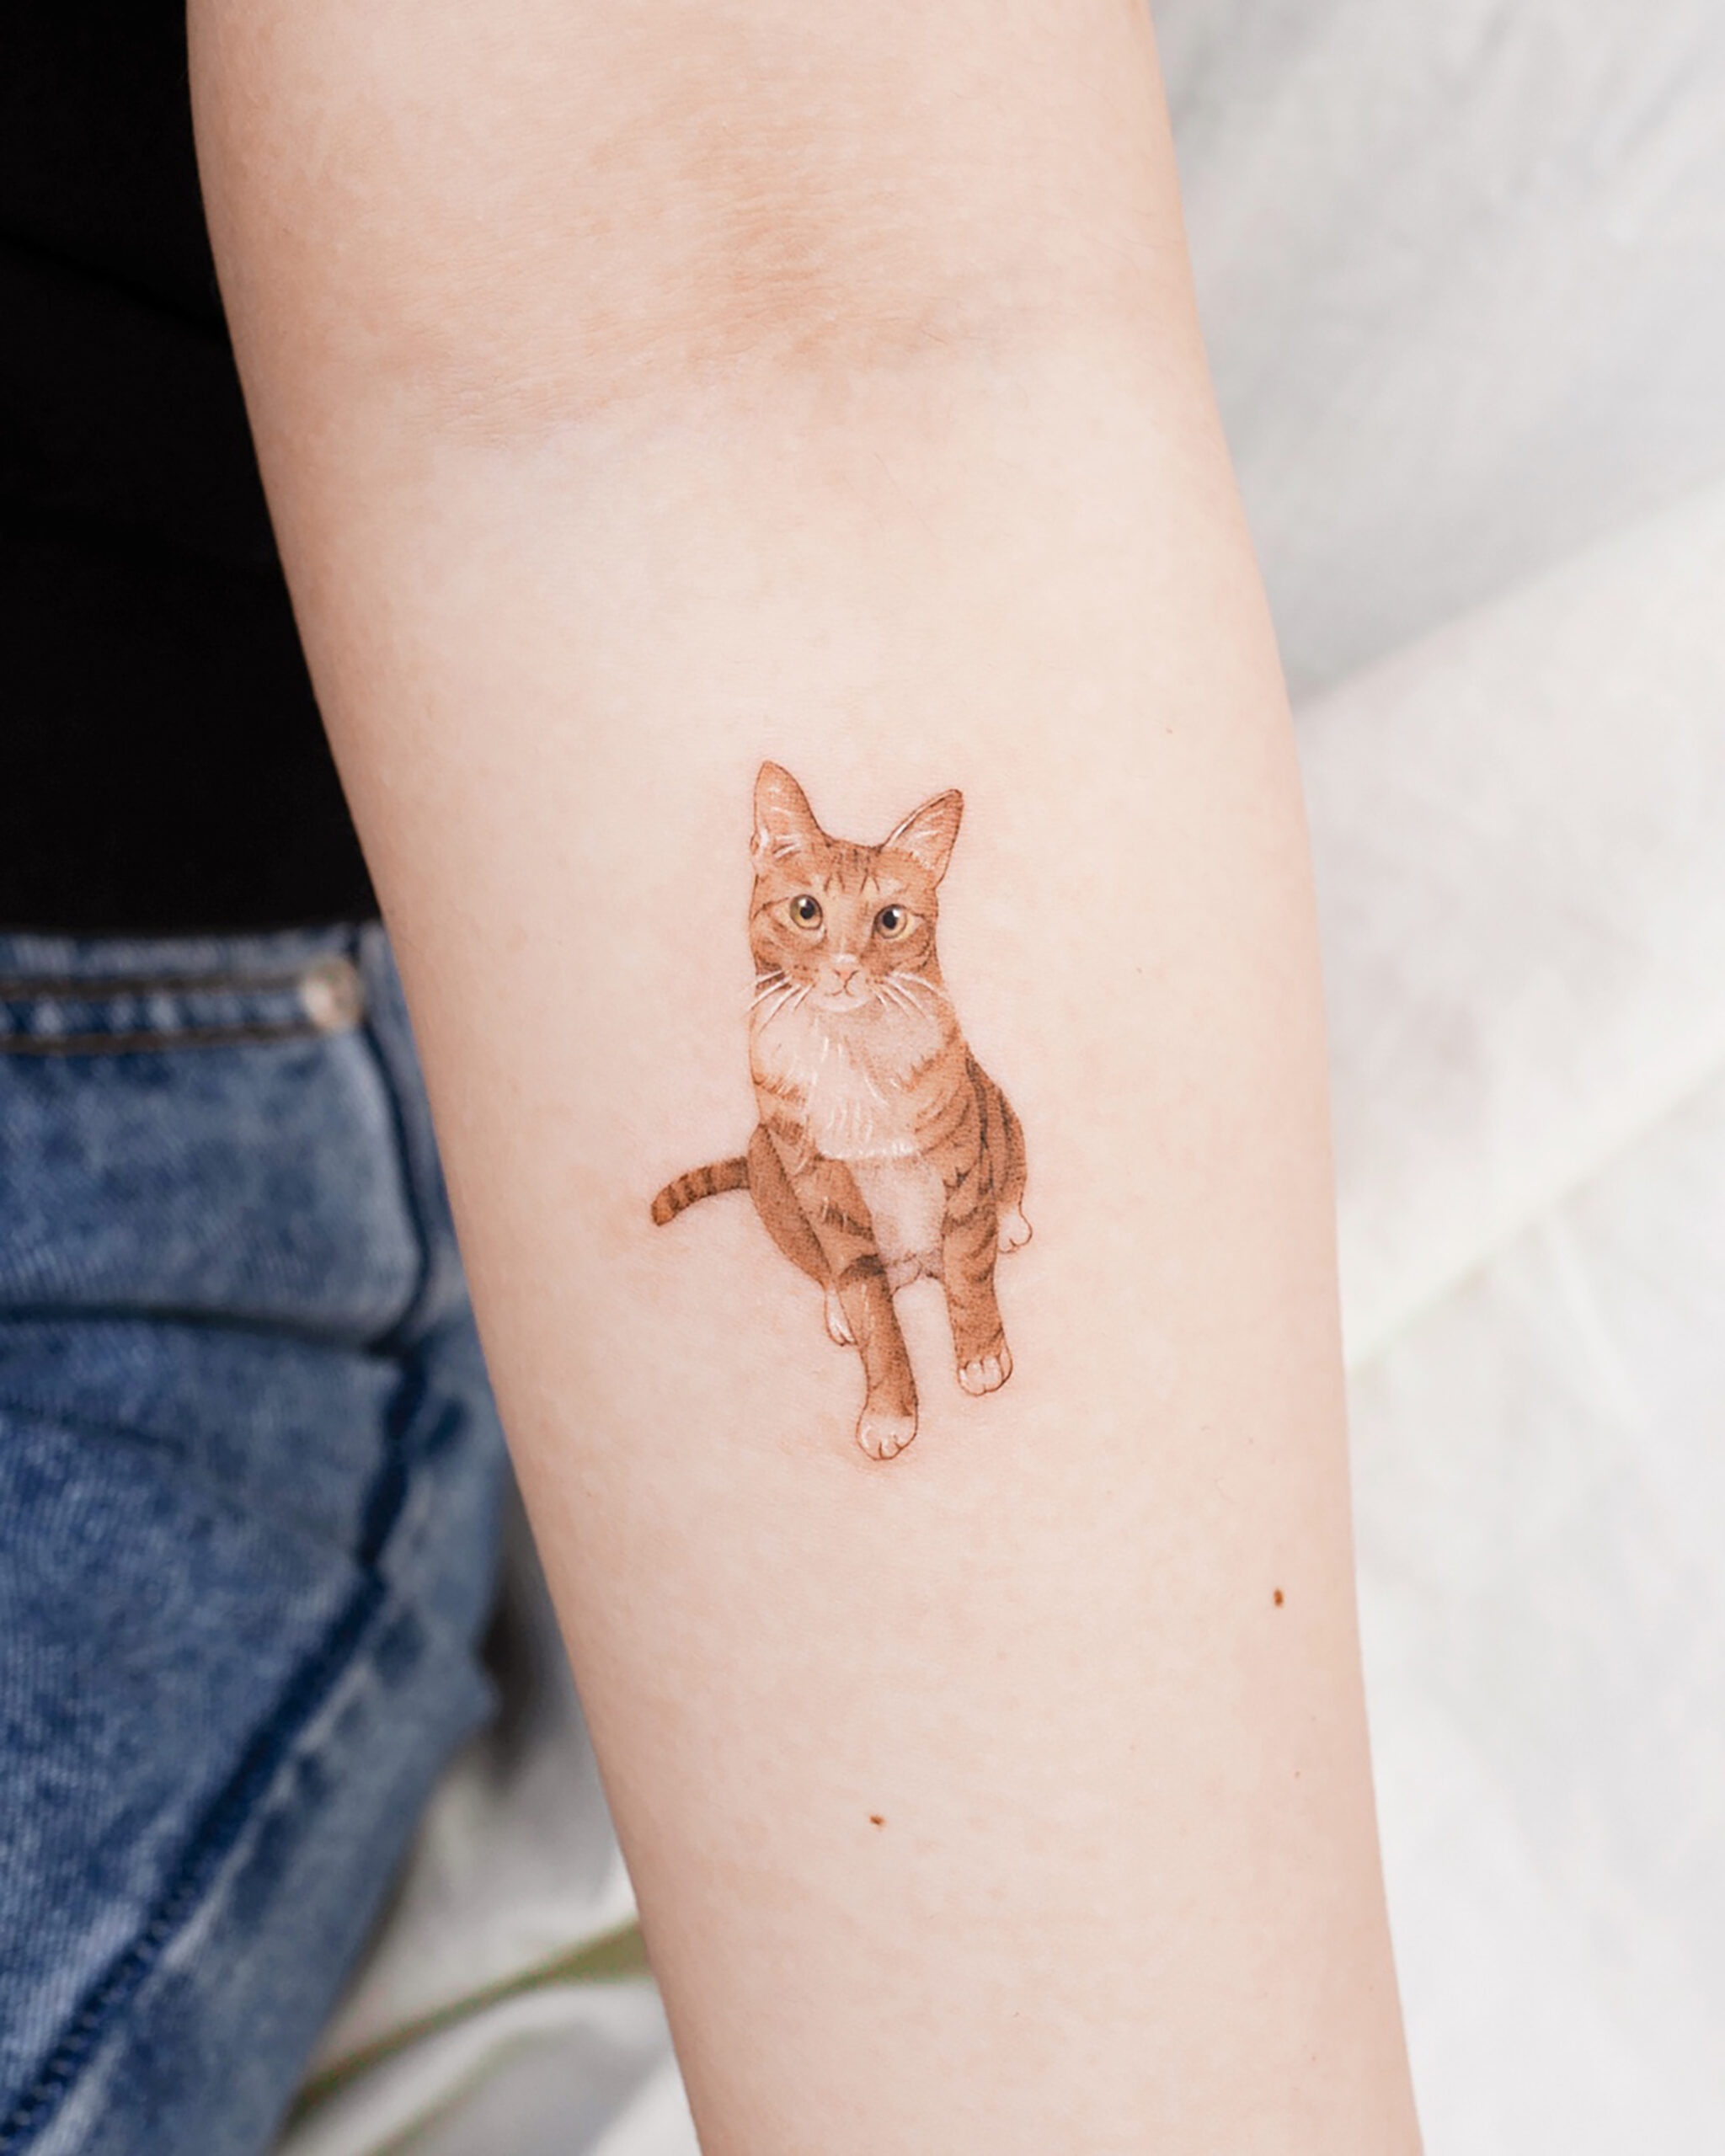 Cats are a sentimental subject for the Seoul tattooist